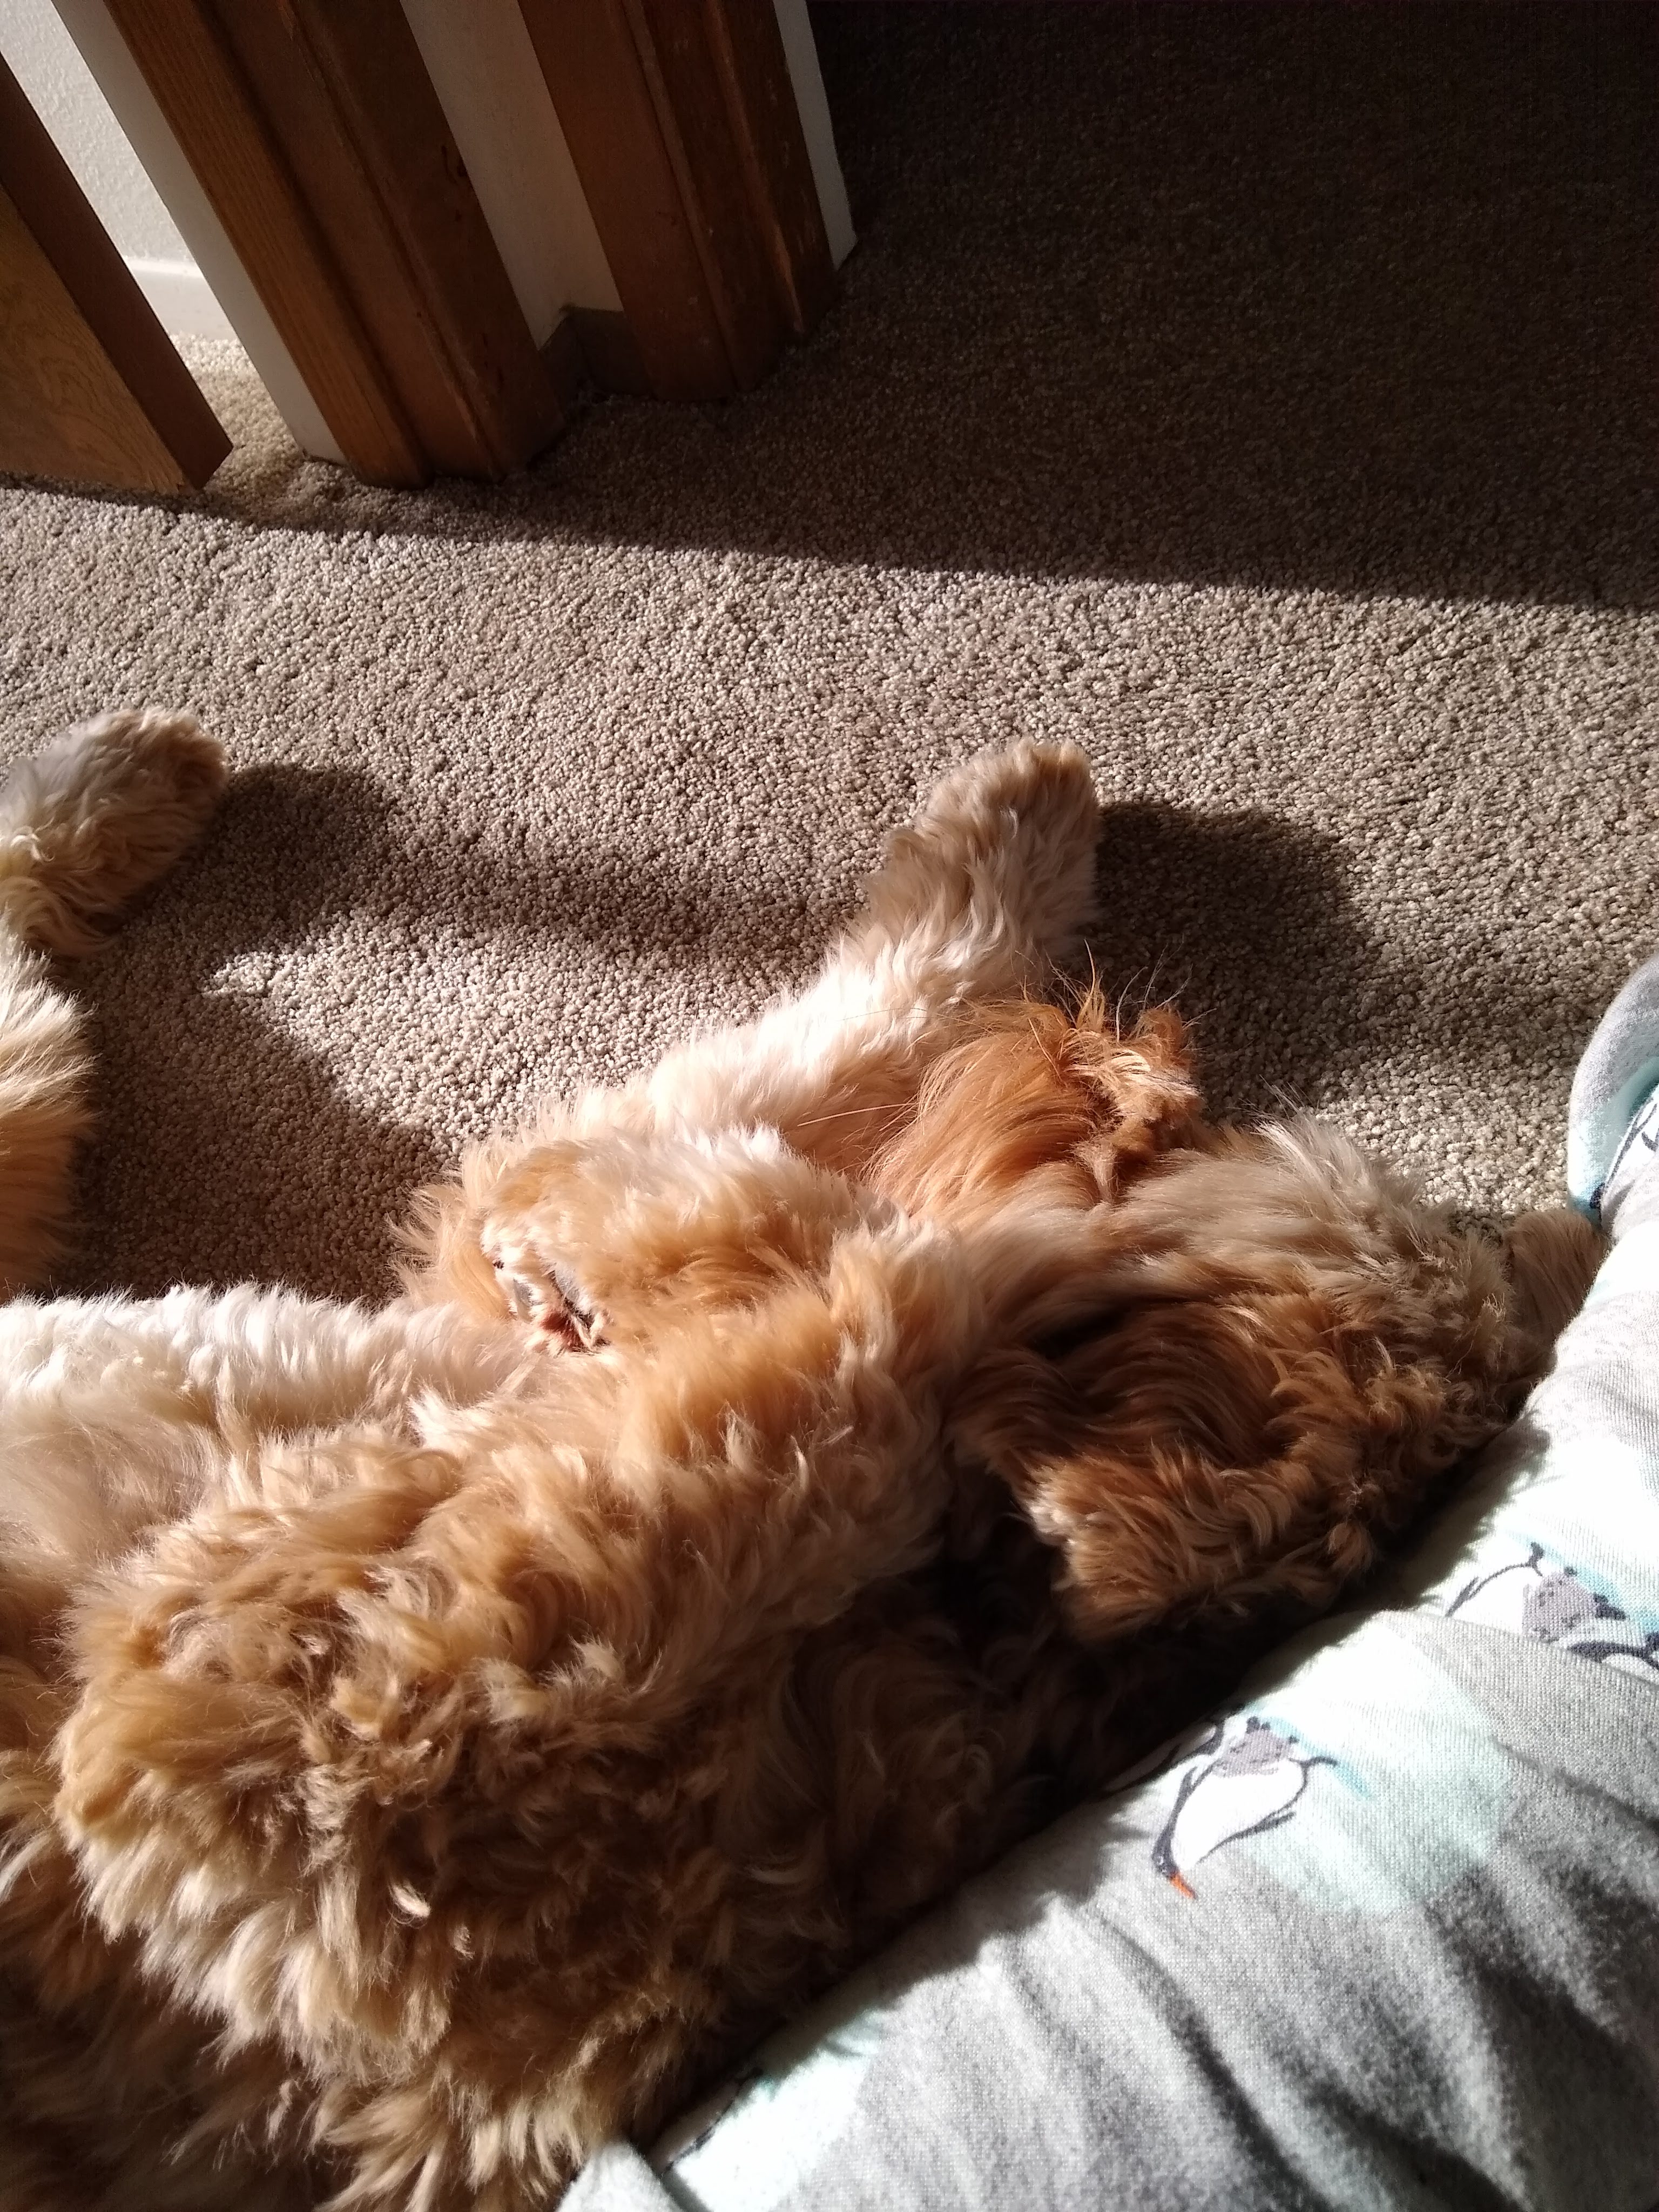 Hachi curled up by a pair of legs in the sun.